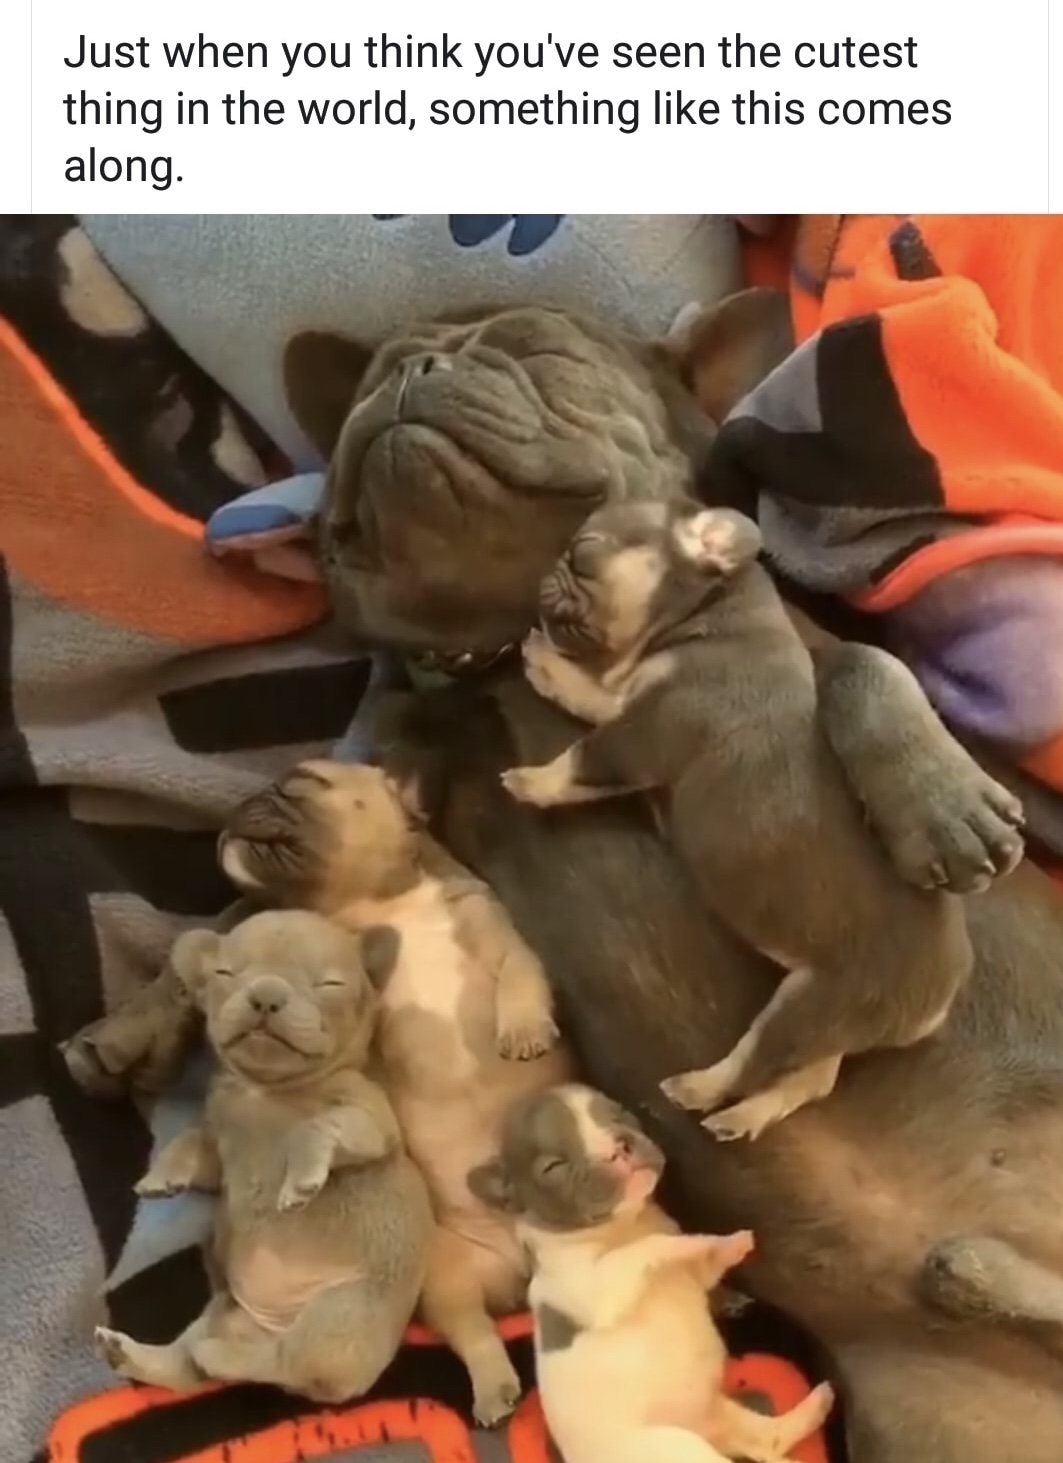 family dogs gif - Just when you think you've seen the cutest thing in the world, something this comes along.